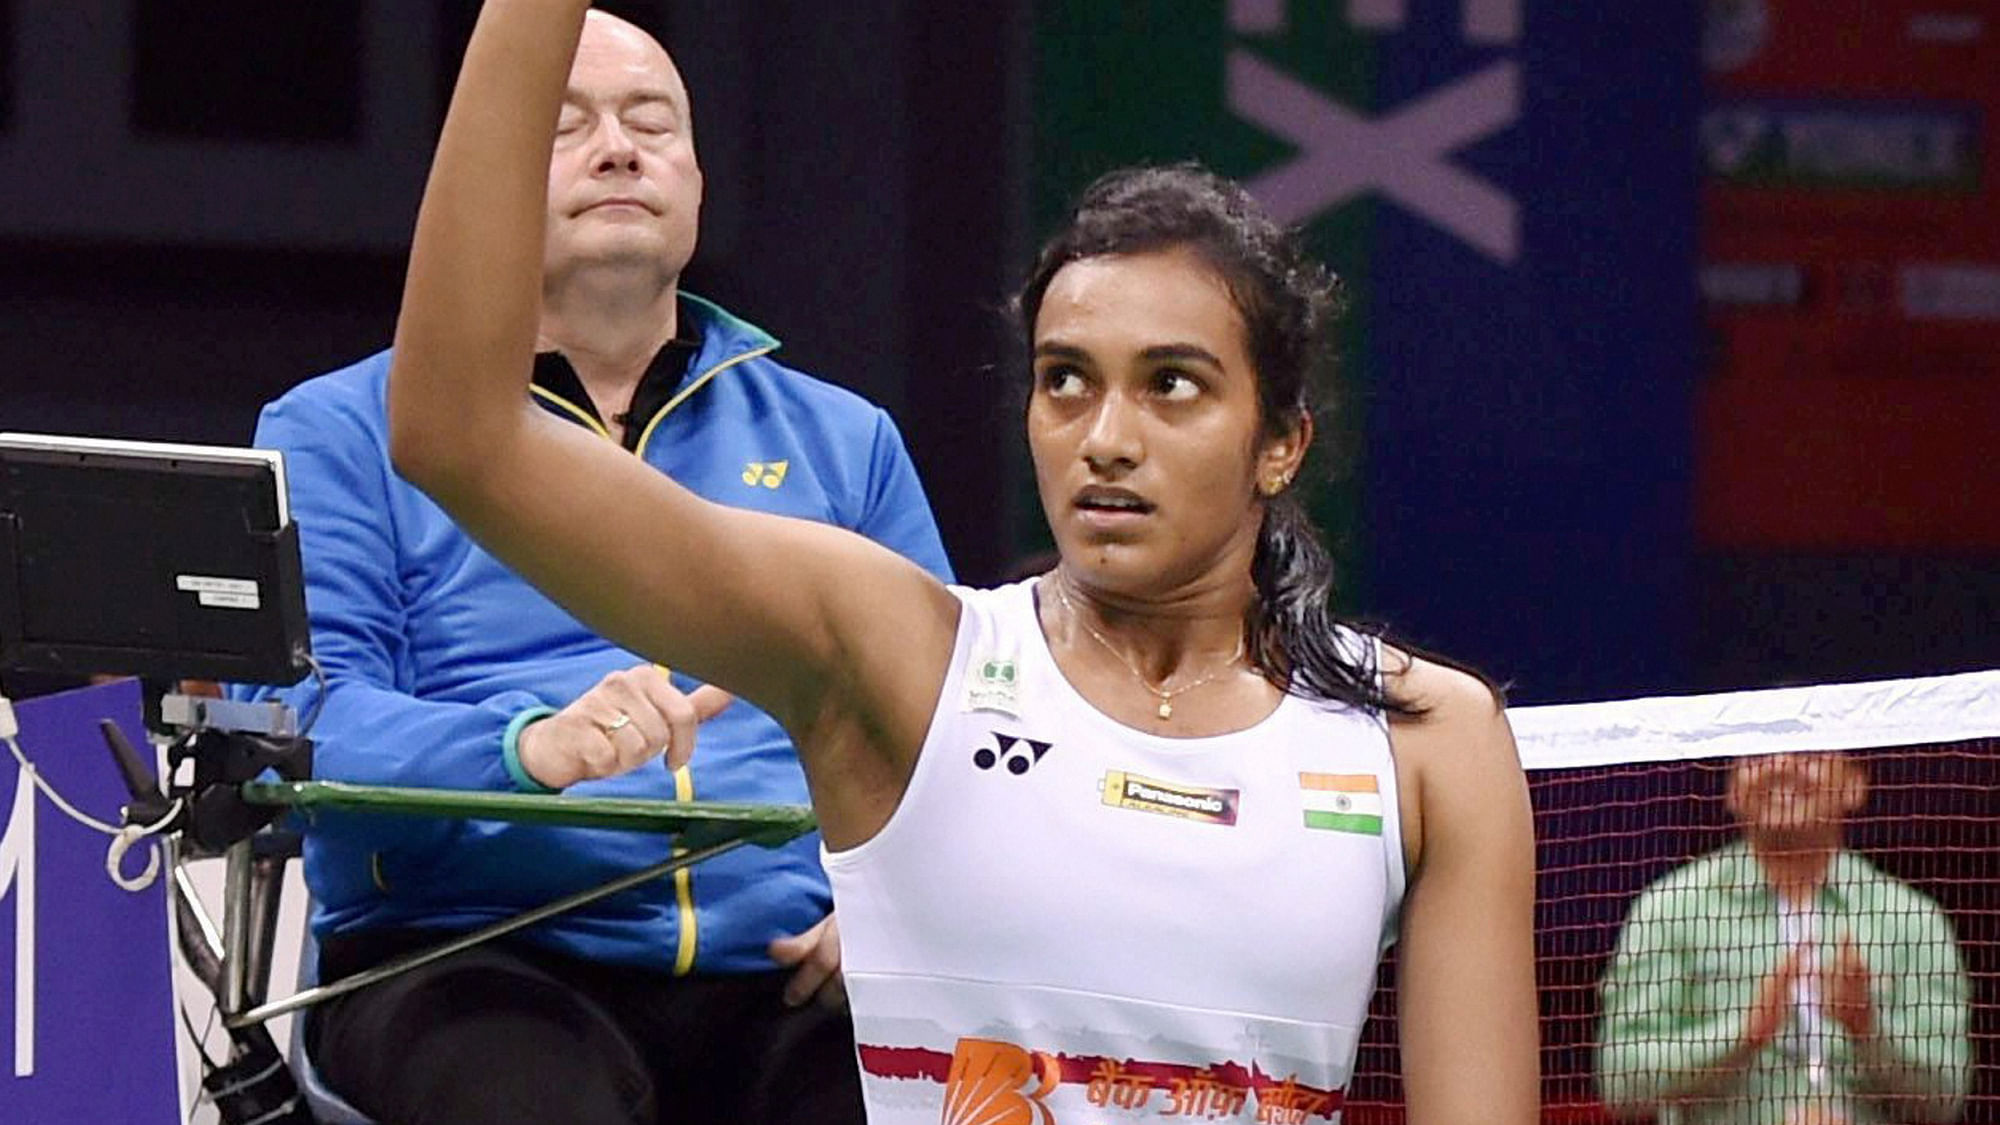 PV Sindhu waves to the crowd  after winning the semifinal match against Korean player Sung Ji Hyun during the Yonex Sunrise India open in New Delhi. (Photo: PTI)